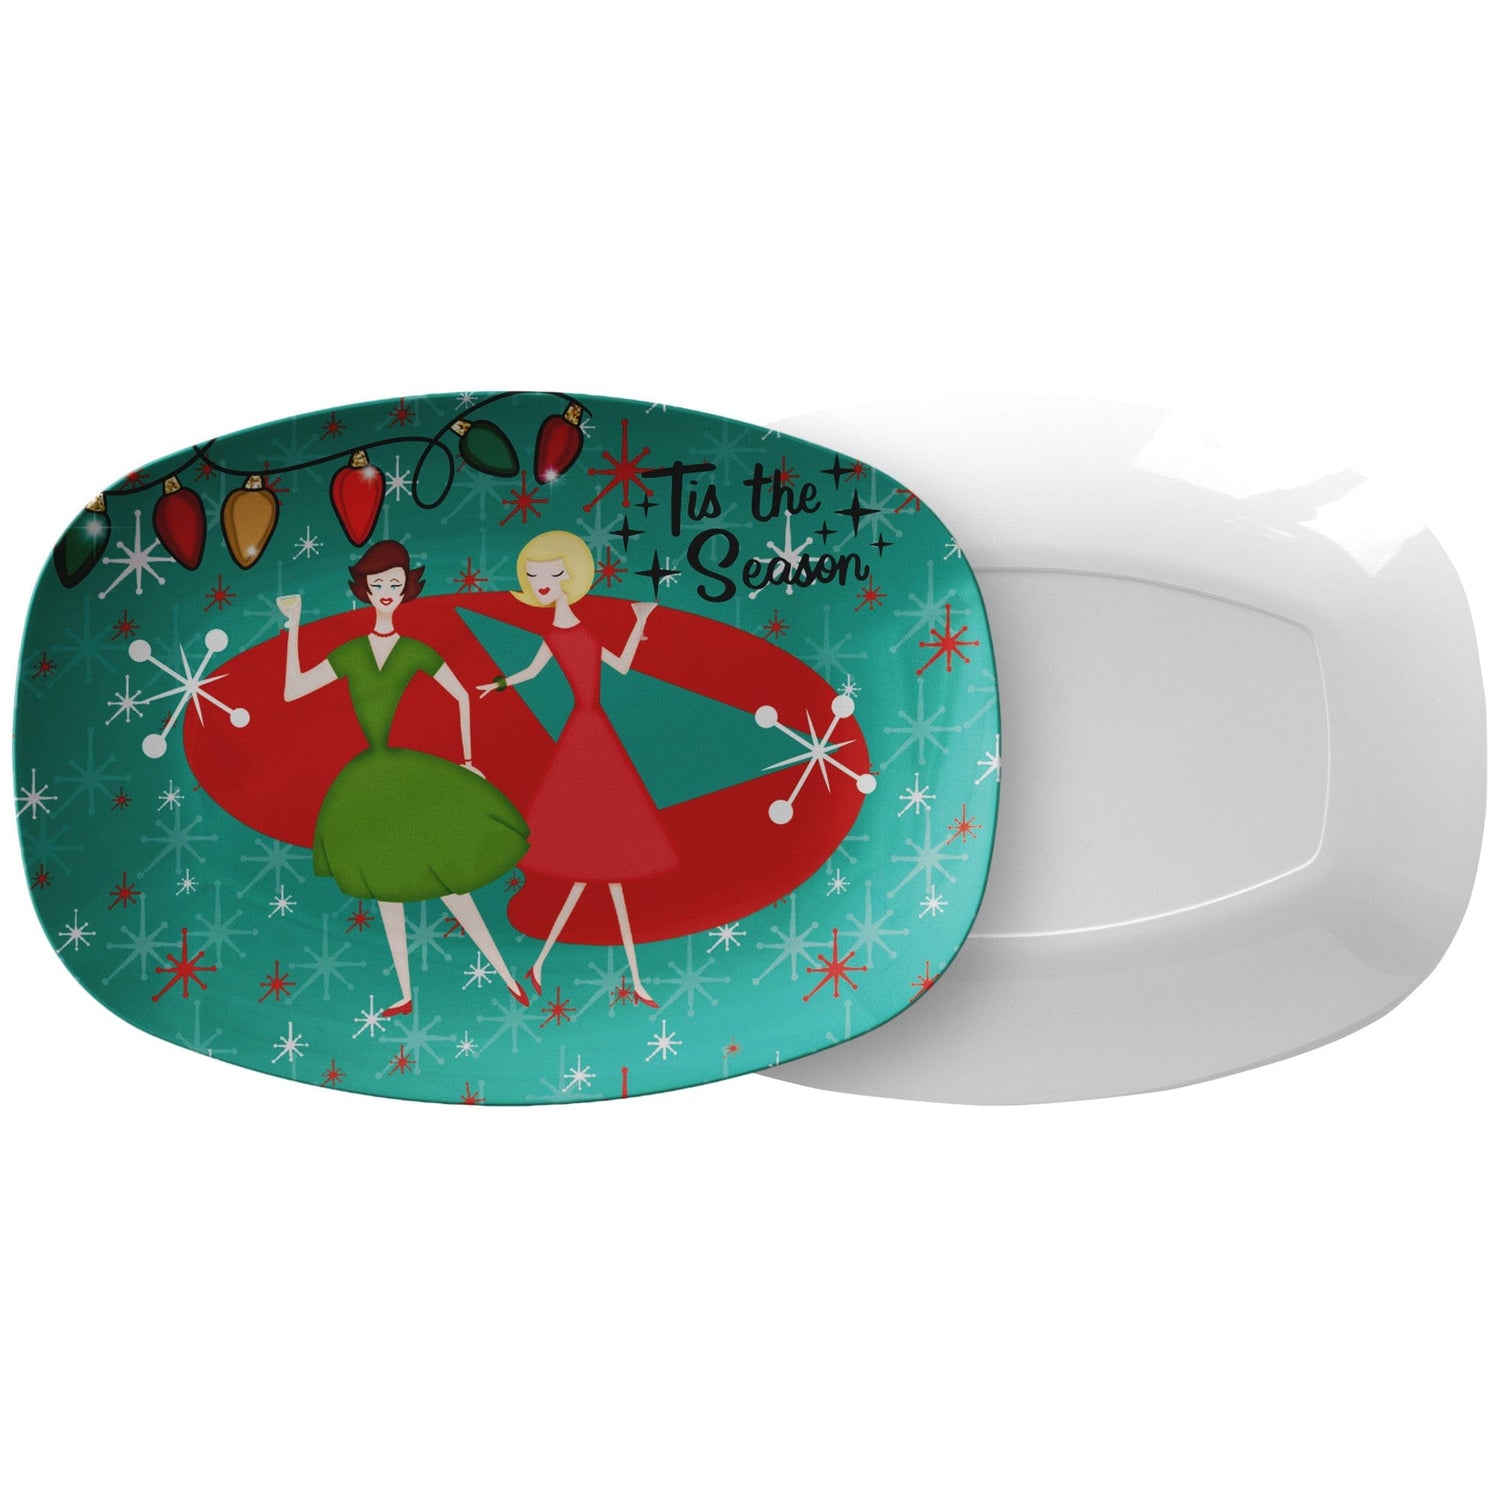 Mid Century Modern Party Platter Gift For Women Couples, Lesbian Christmas Gifts, Retro Party Kitchenware